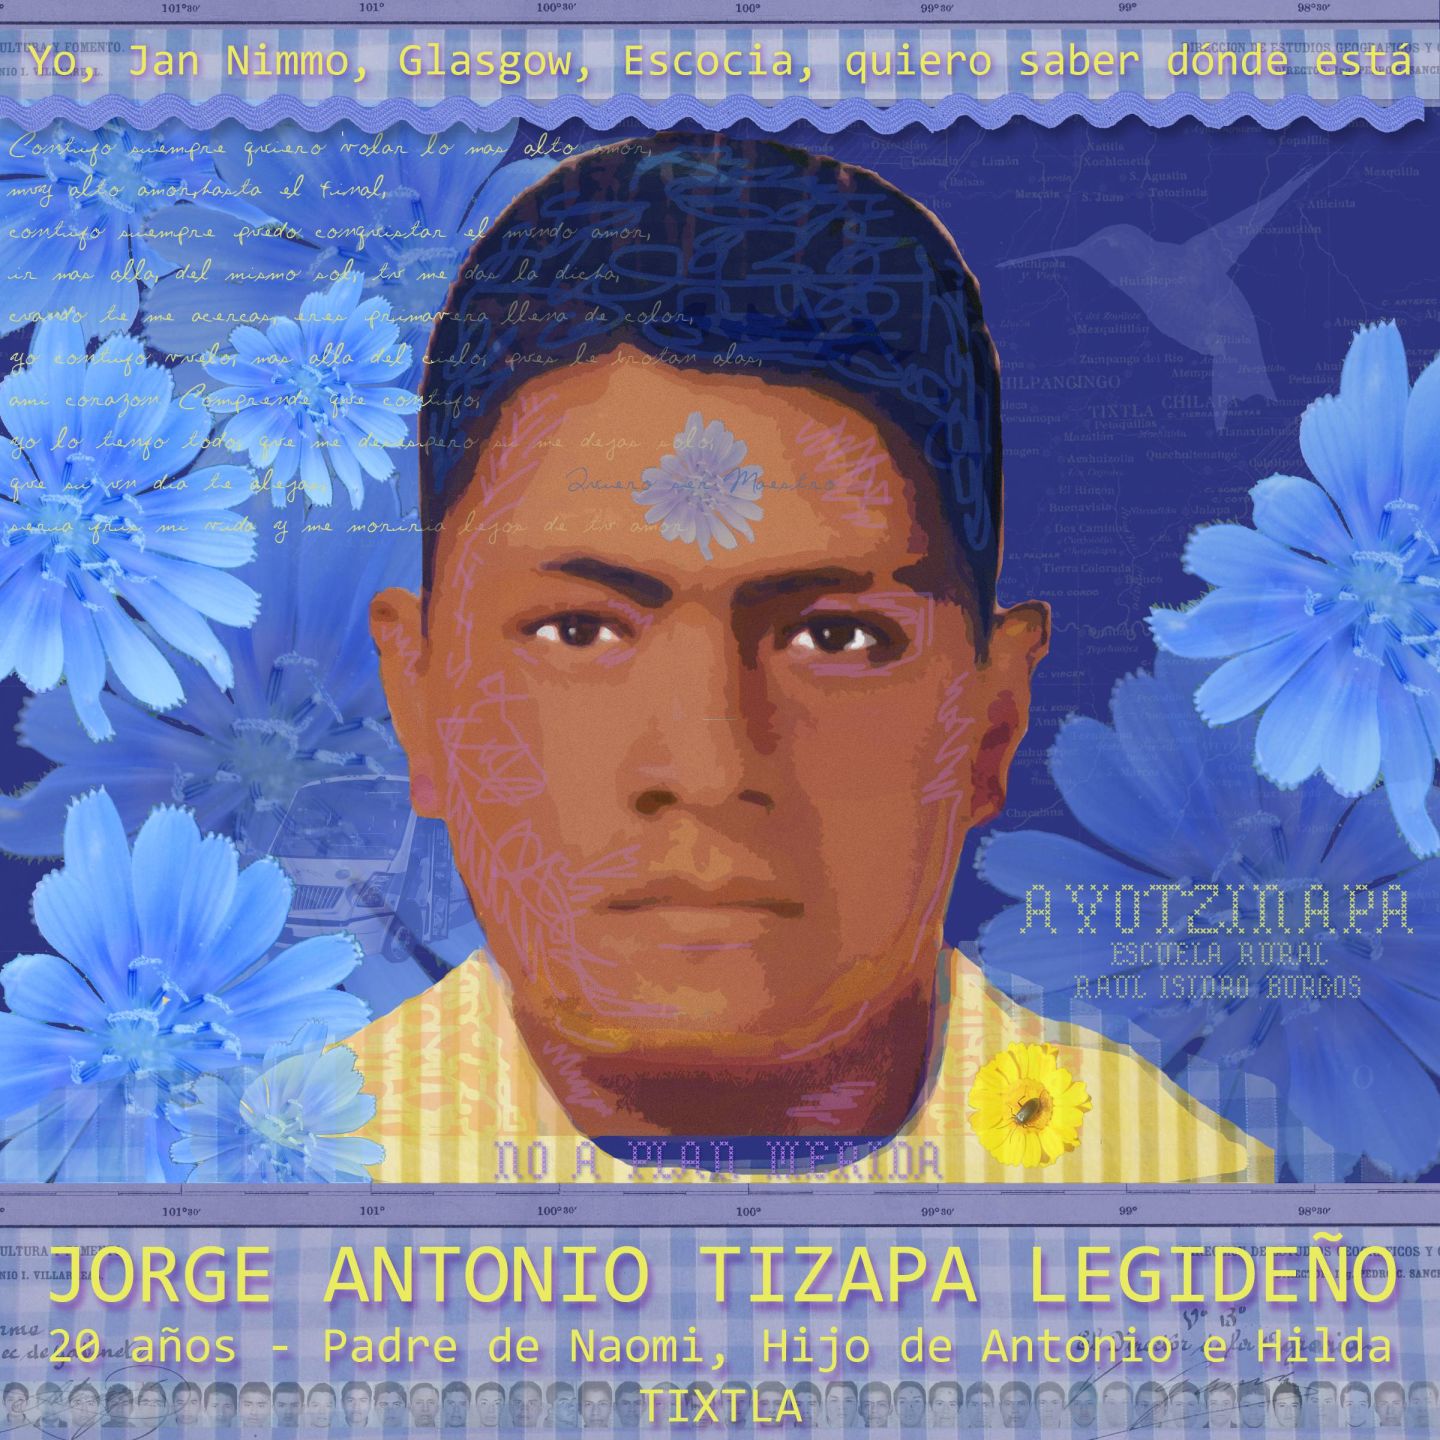 A tribute to Mexico's disappeared amidst demands for the truth 28